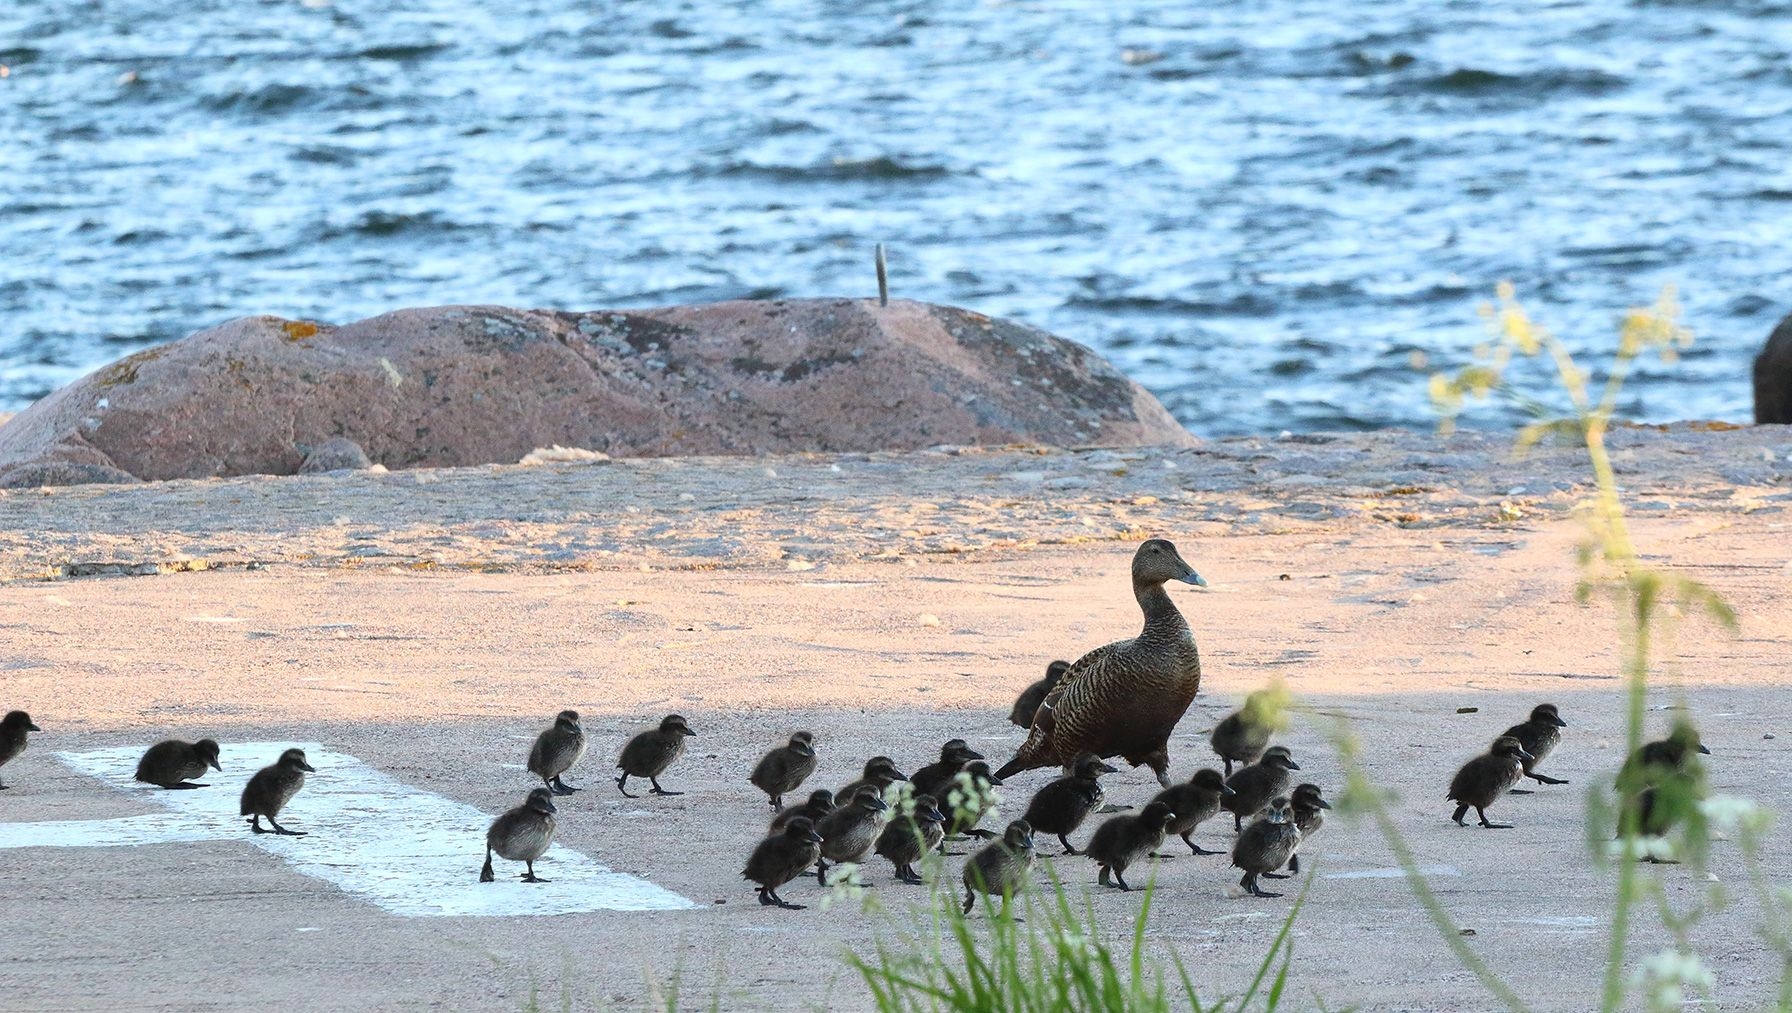 A mother duck walks with a group of ducklings along the beach.